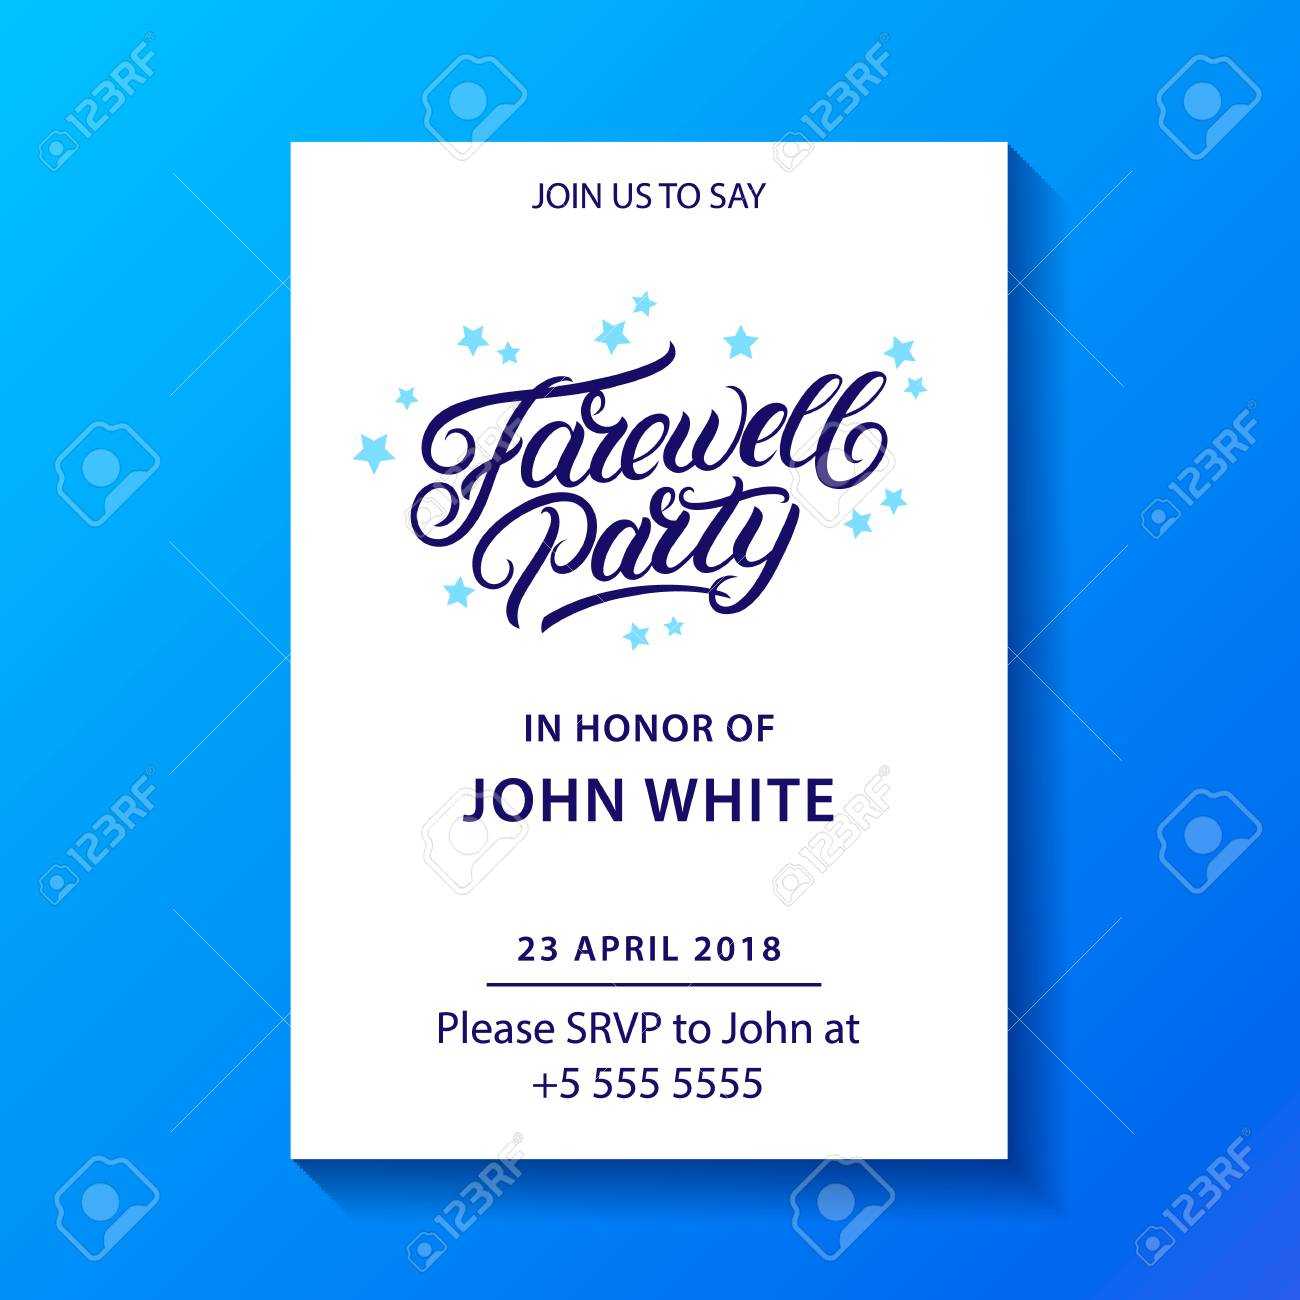 Farewell Party Hand Written Lettering. Invitation Card, Poster,.. Pertaining To Goodbye Card Template